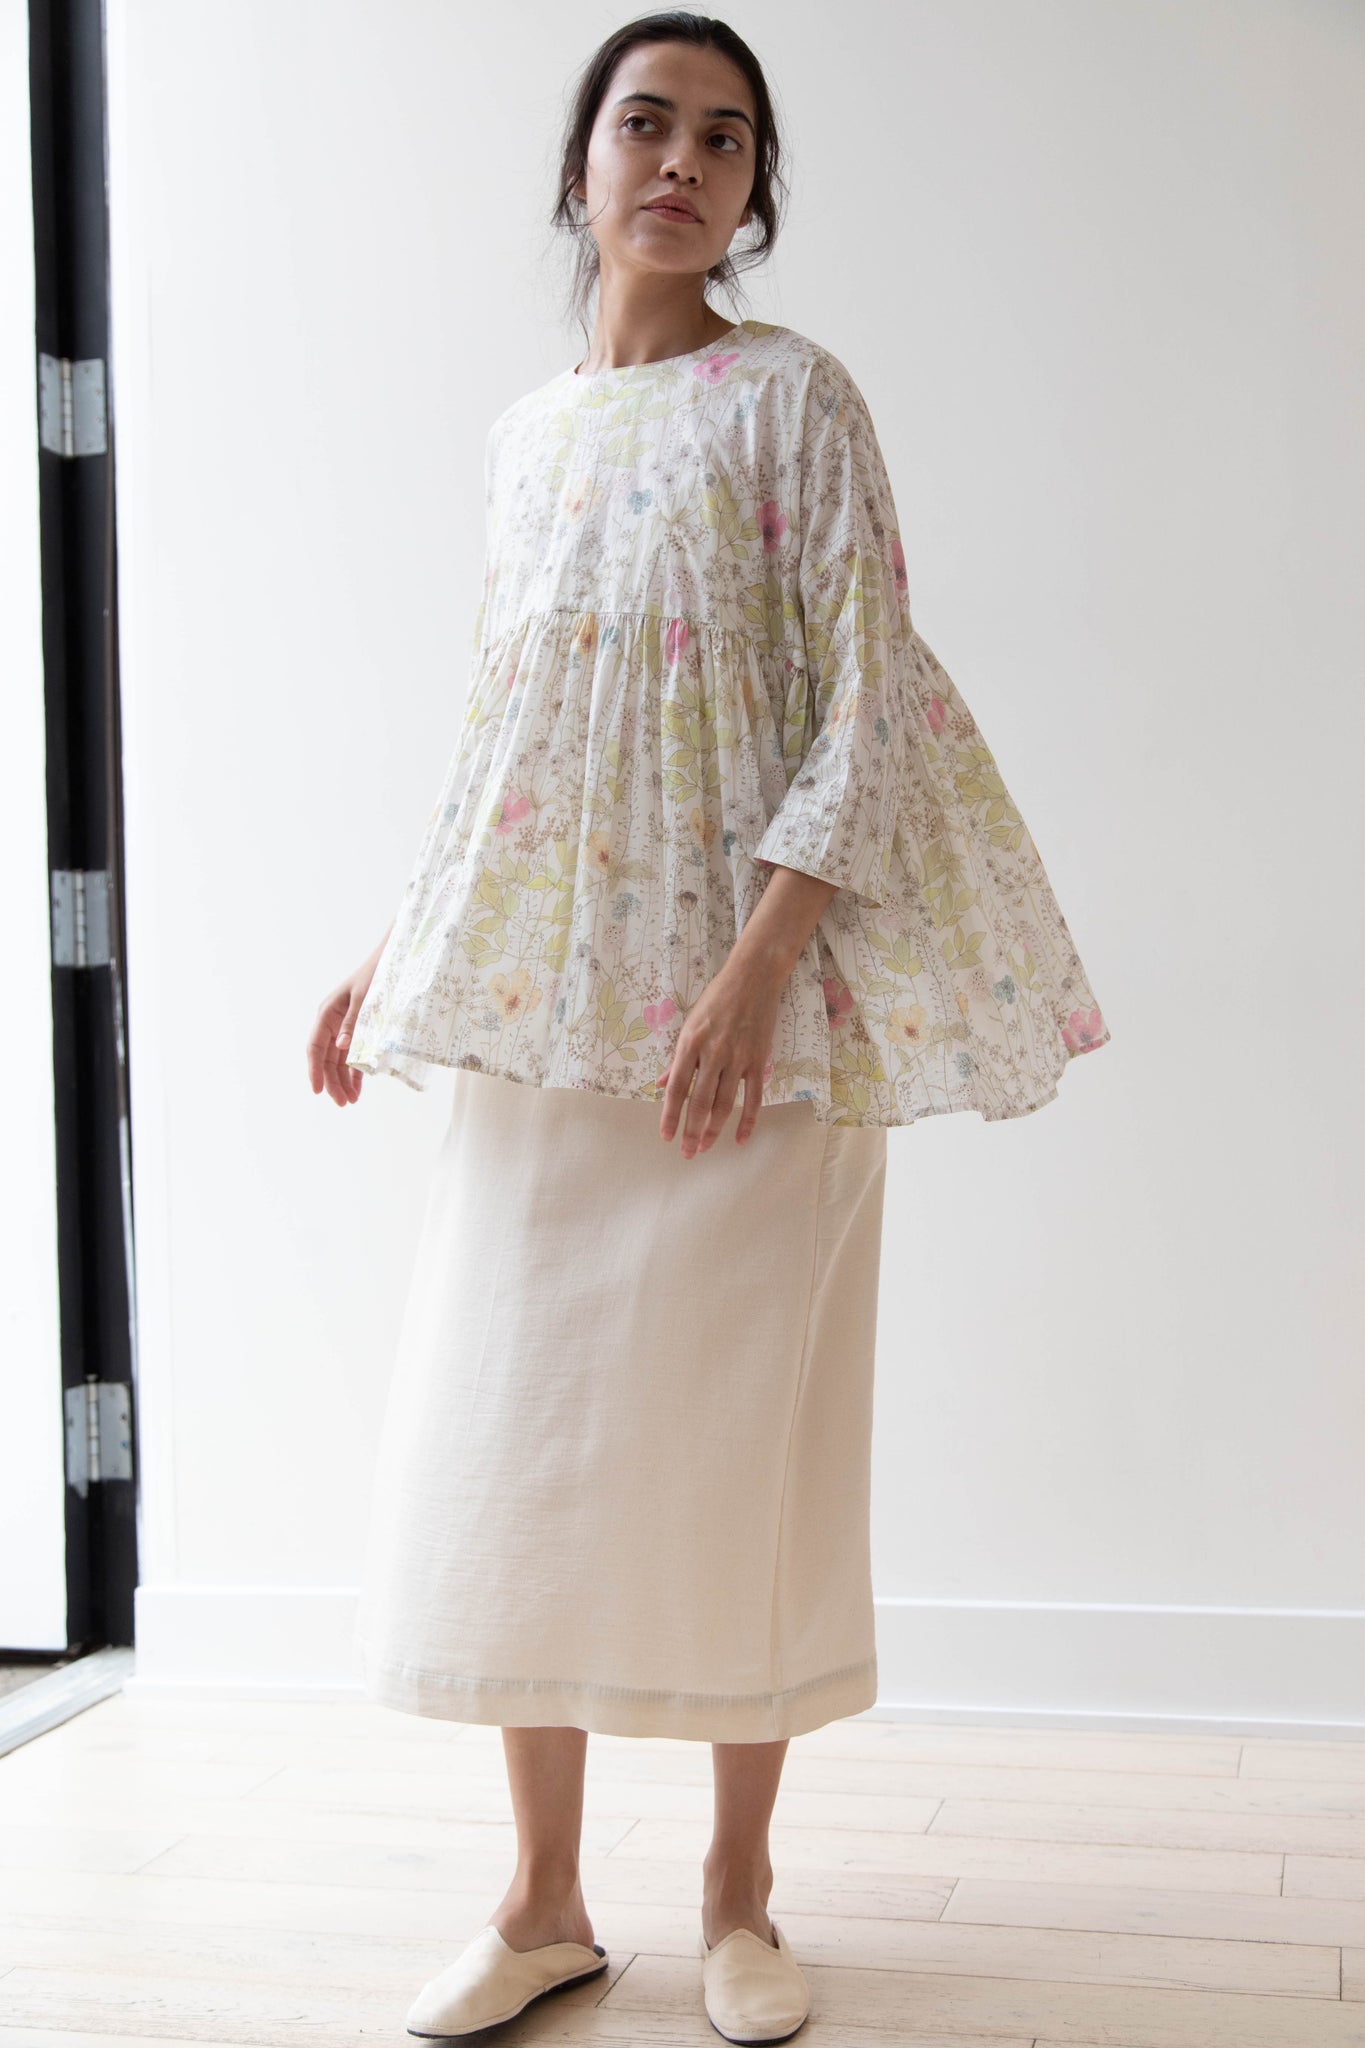 Gauze | Gather Blouse in Irma's Meadow by Liberty of London